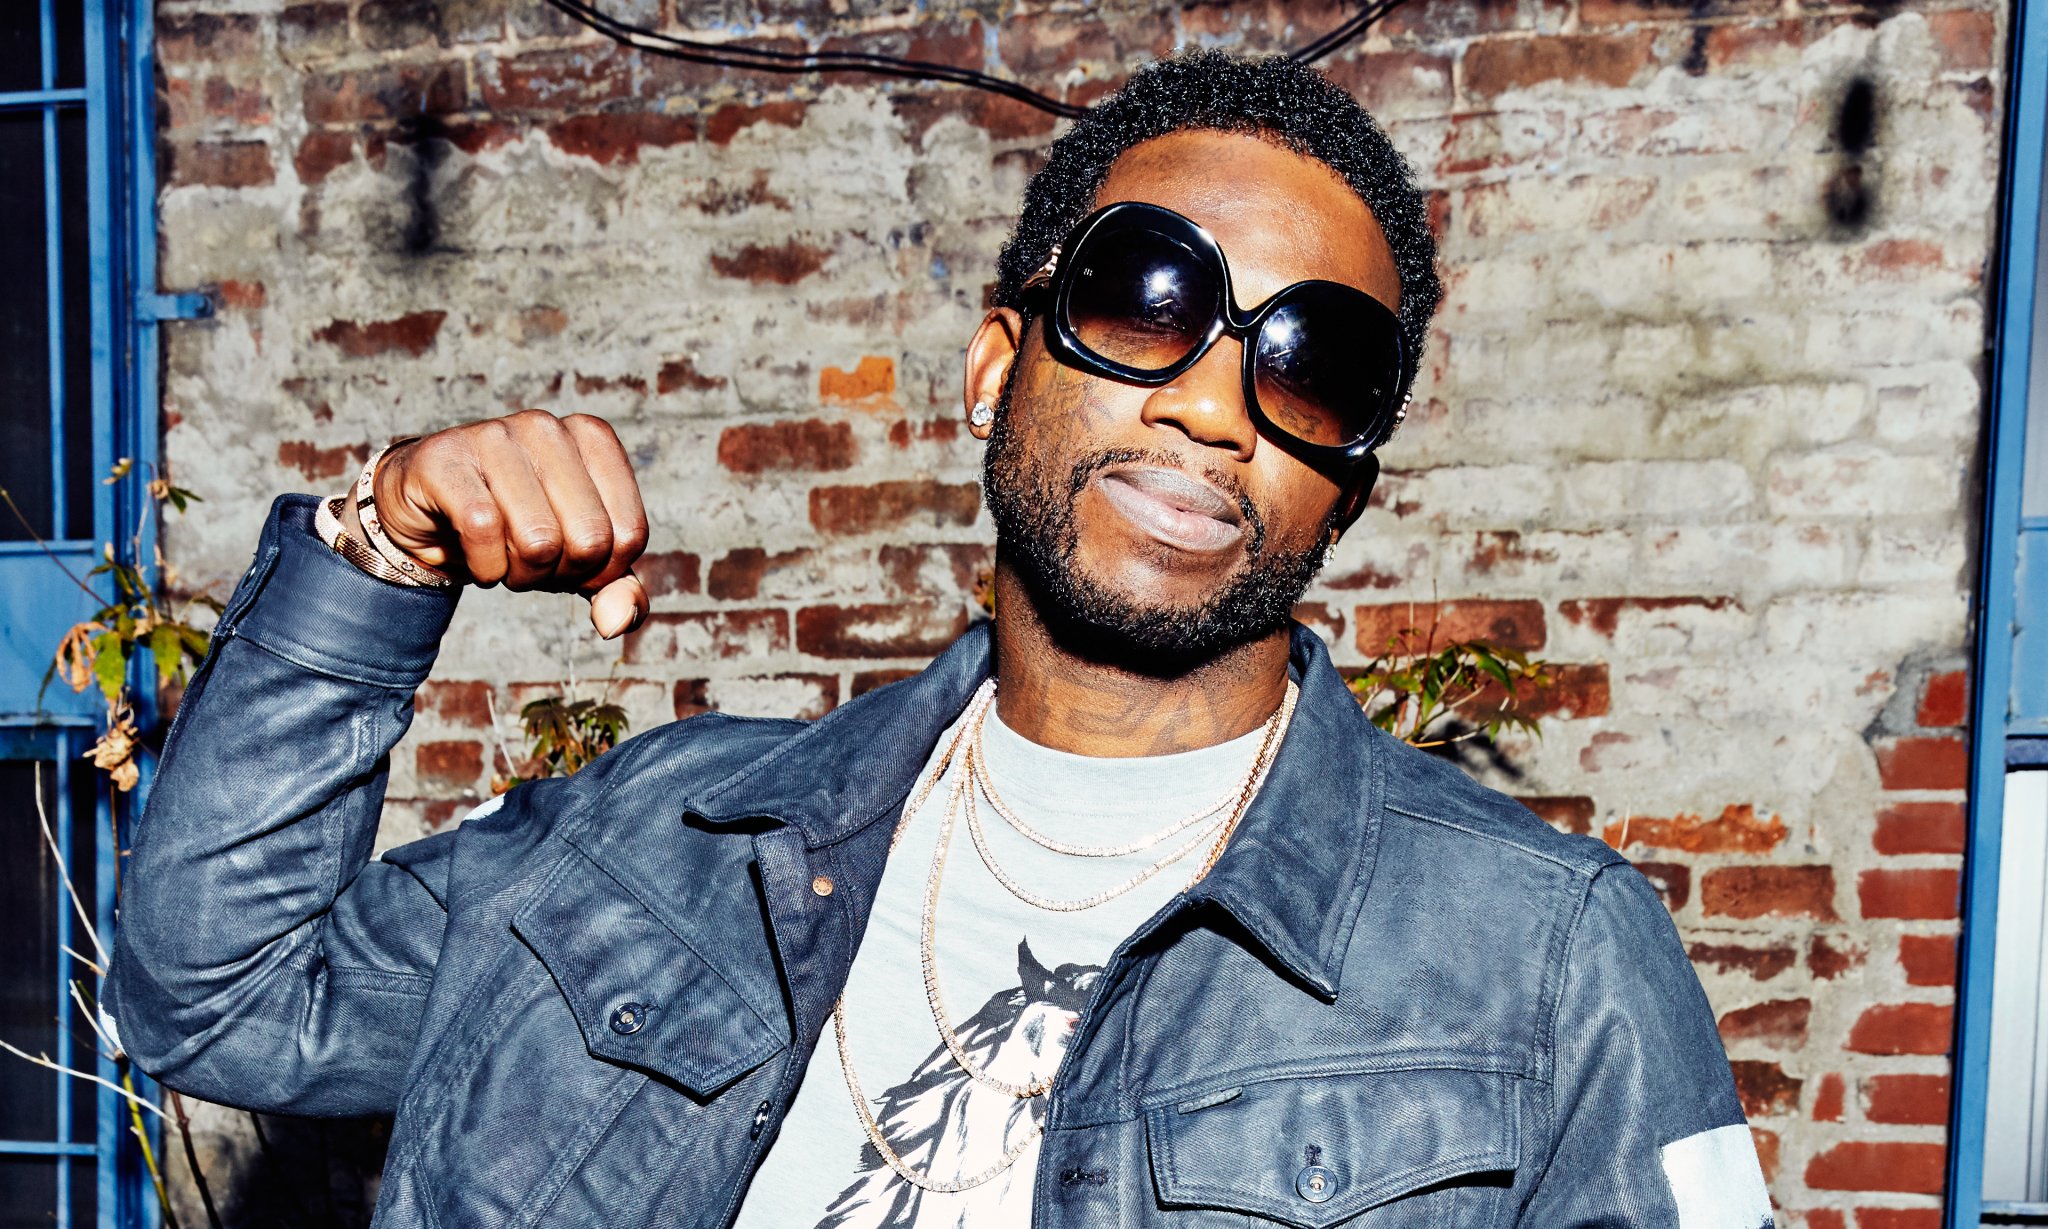 Gucci Mane: ‘Being in a place full of death motivated me to change my life’